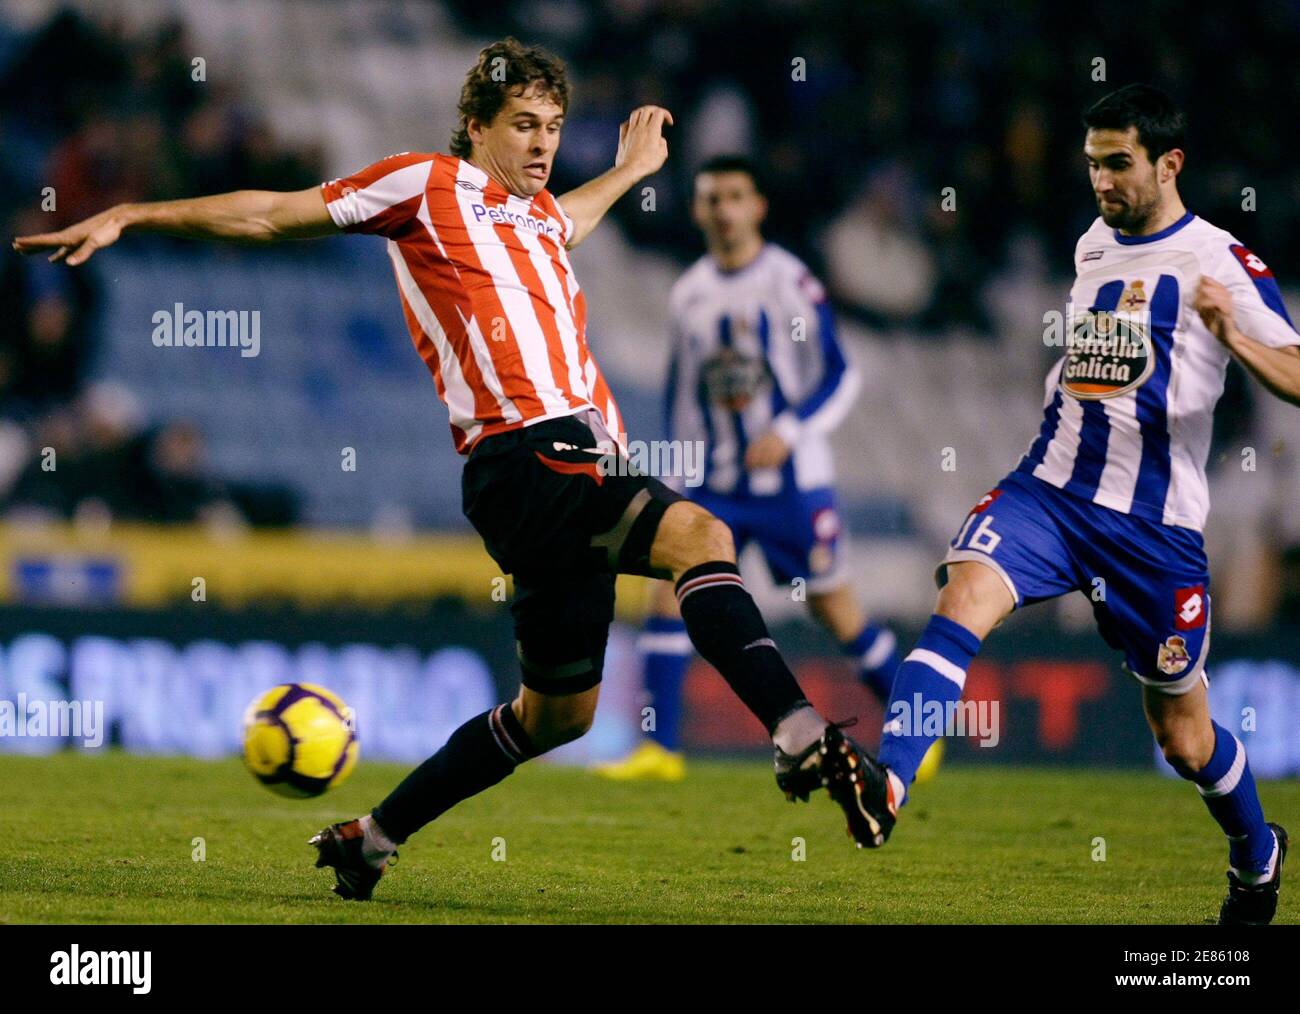 Antonio Tomas High Resolution Stock Photography and Images - Alamy